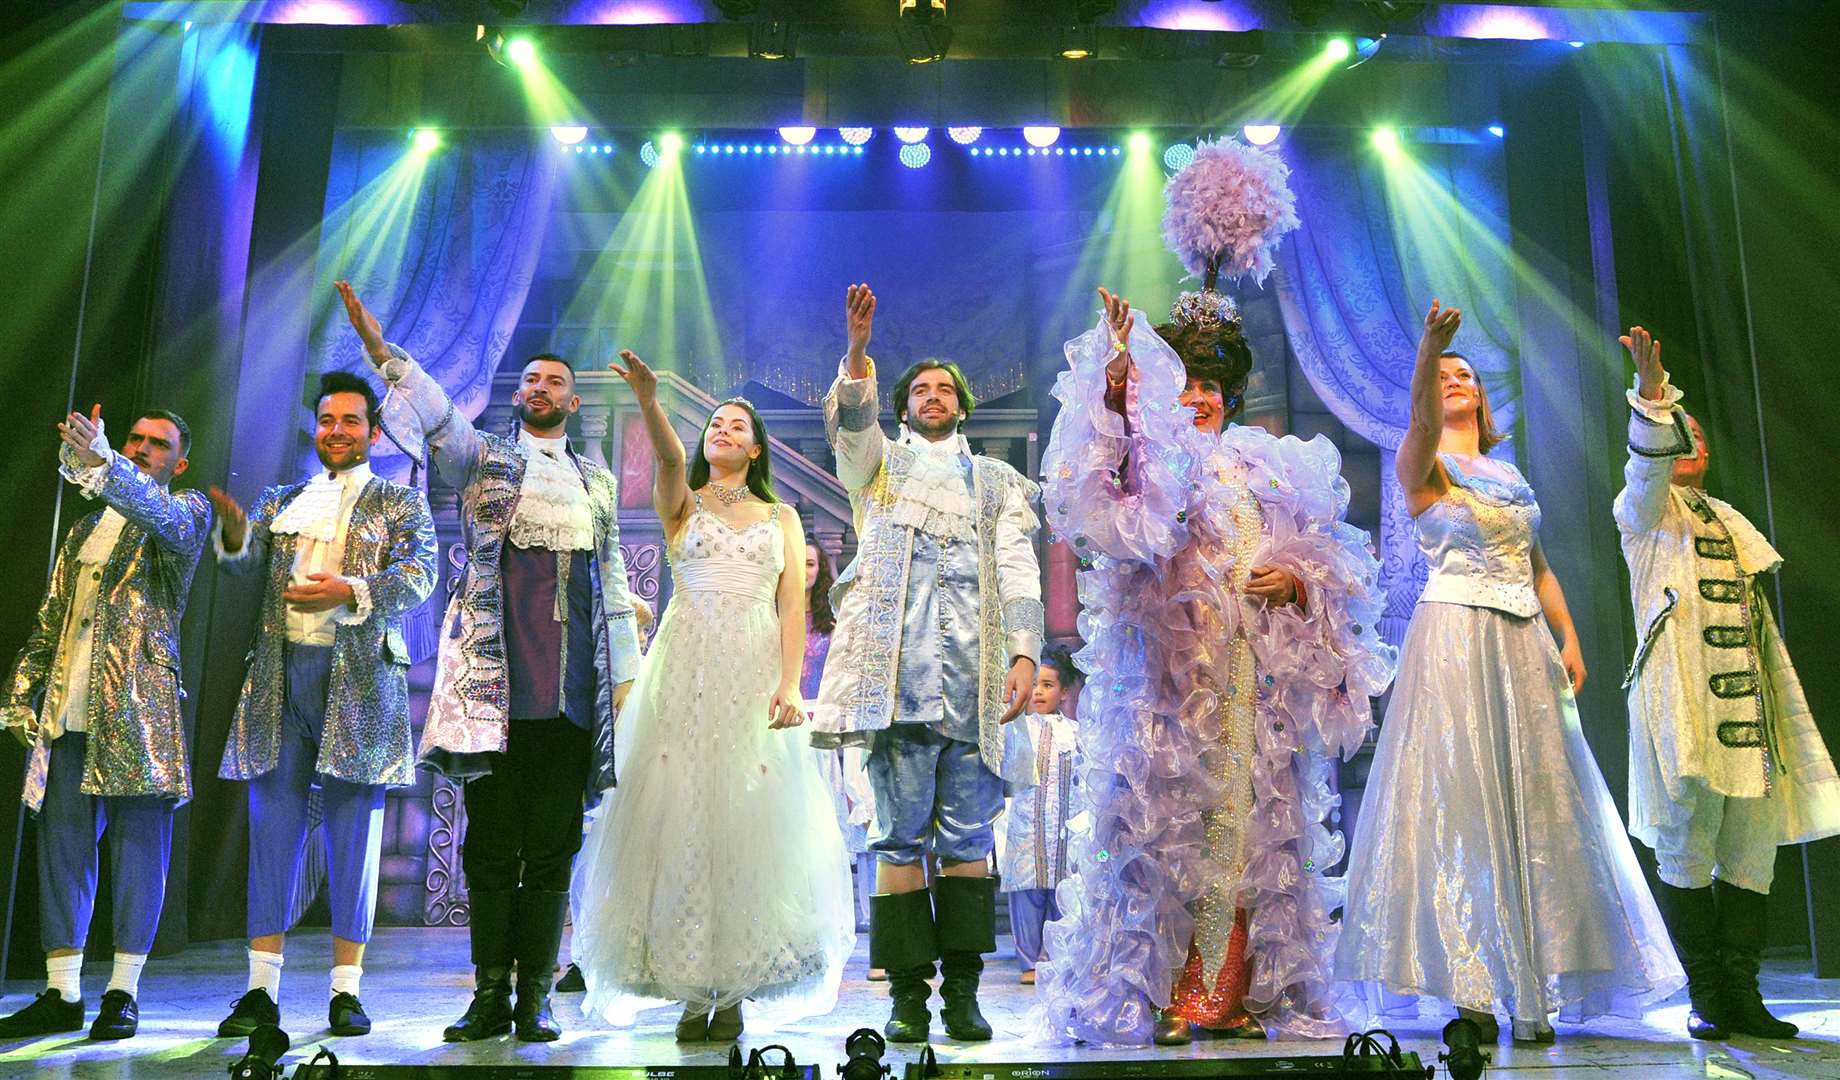 Beauty and the Beast at the Hazlitt Theatre